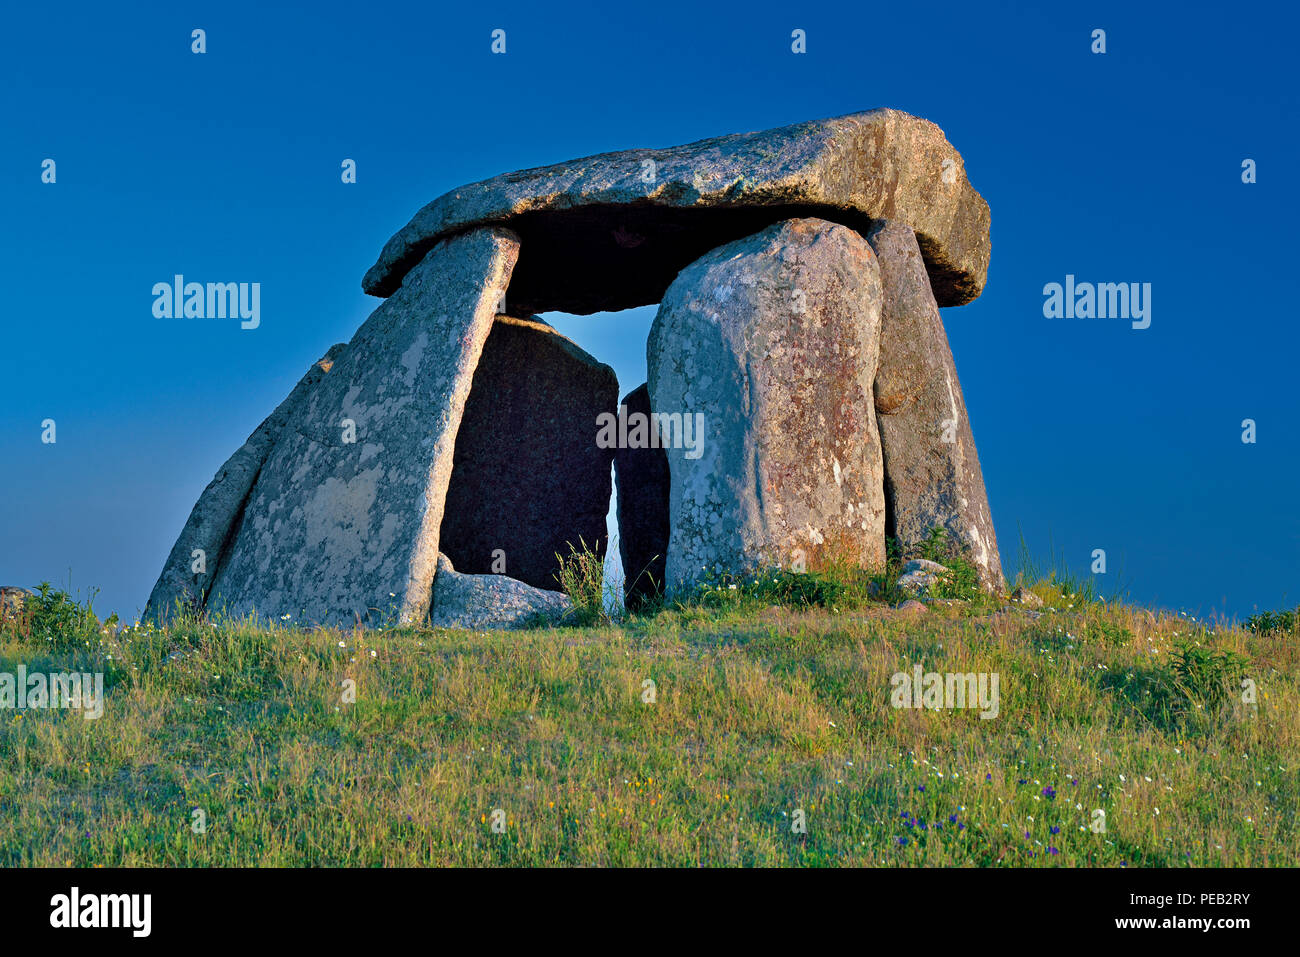 Prehistoric dolmen on a hill with blue sky Stock Photo